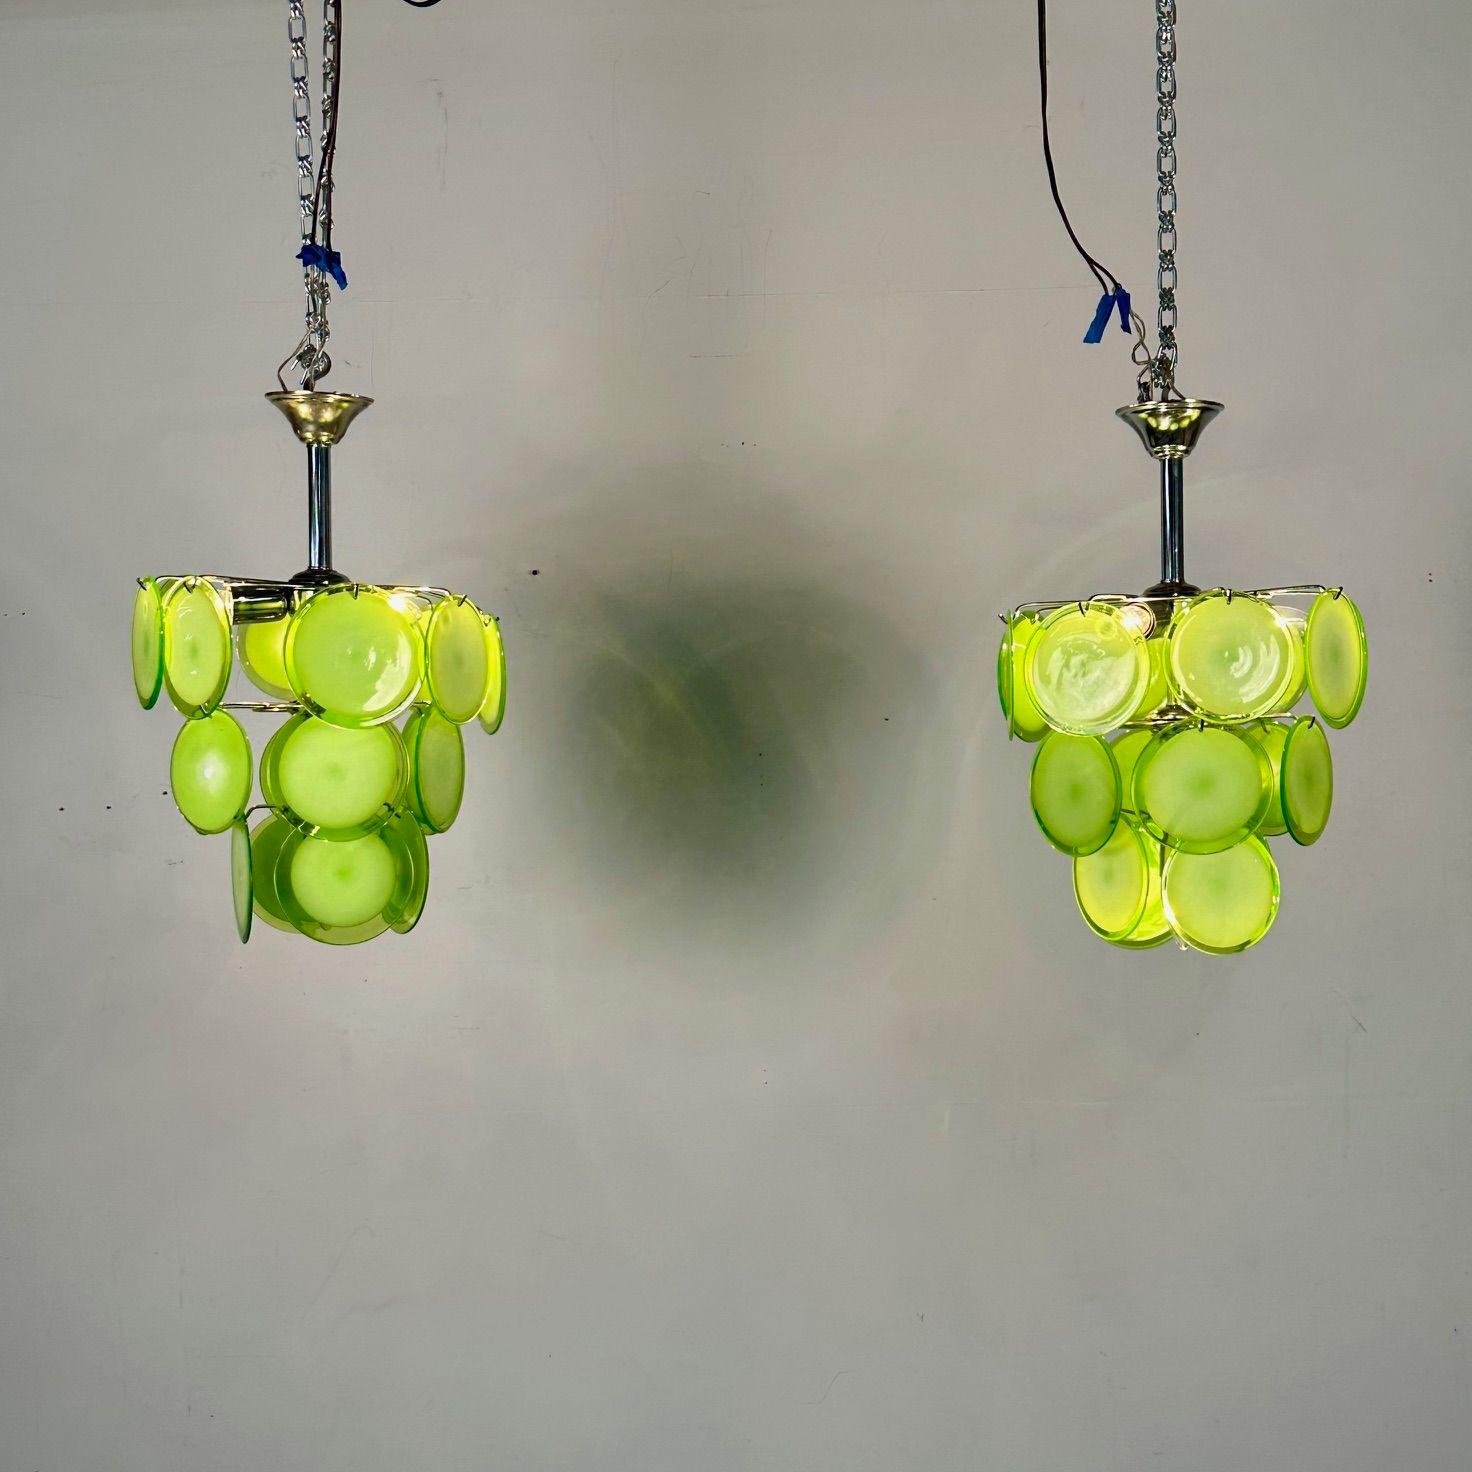 Pair of Mid-Century Modern Style Small Green Murano Glass Disk Chandeliers For Sale 2